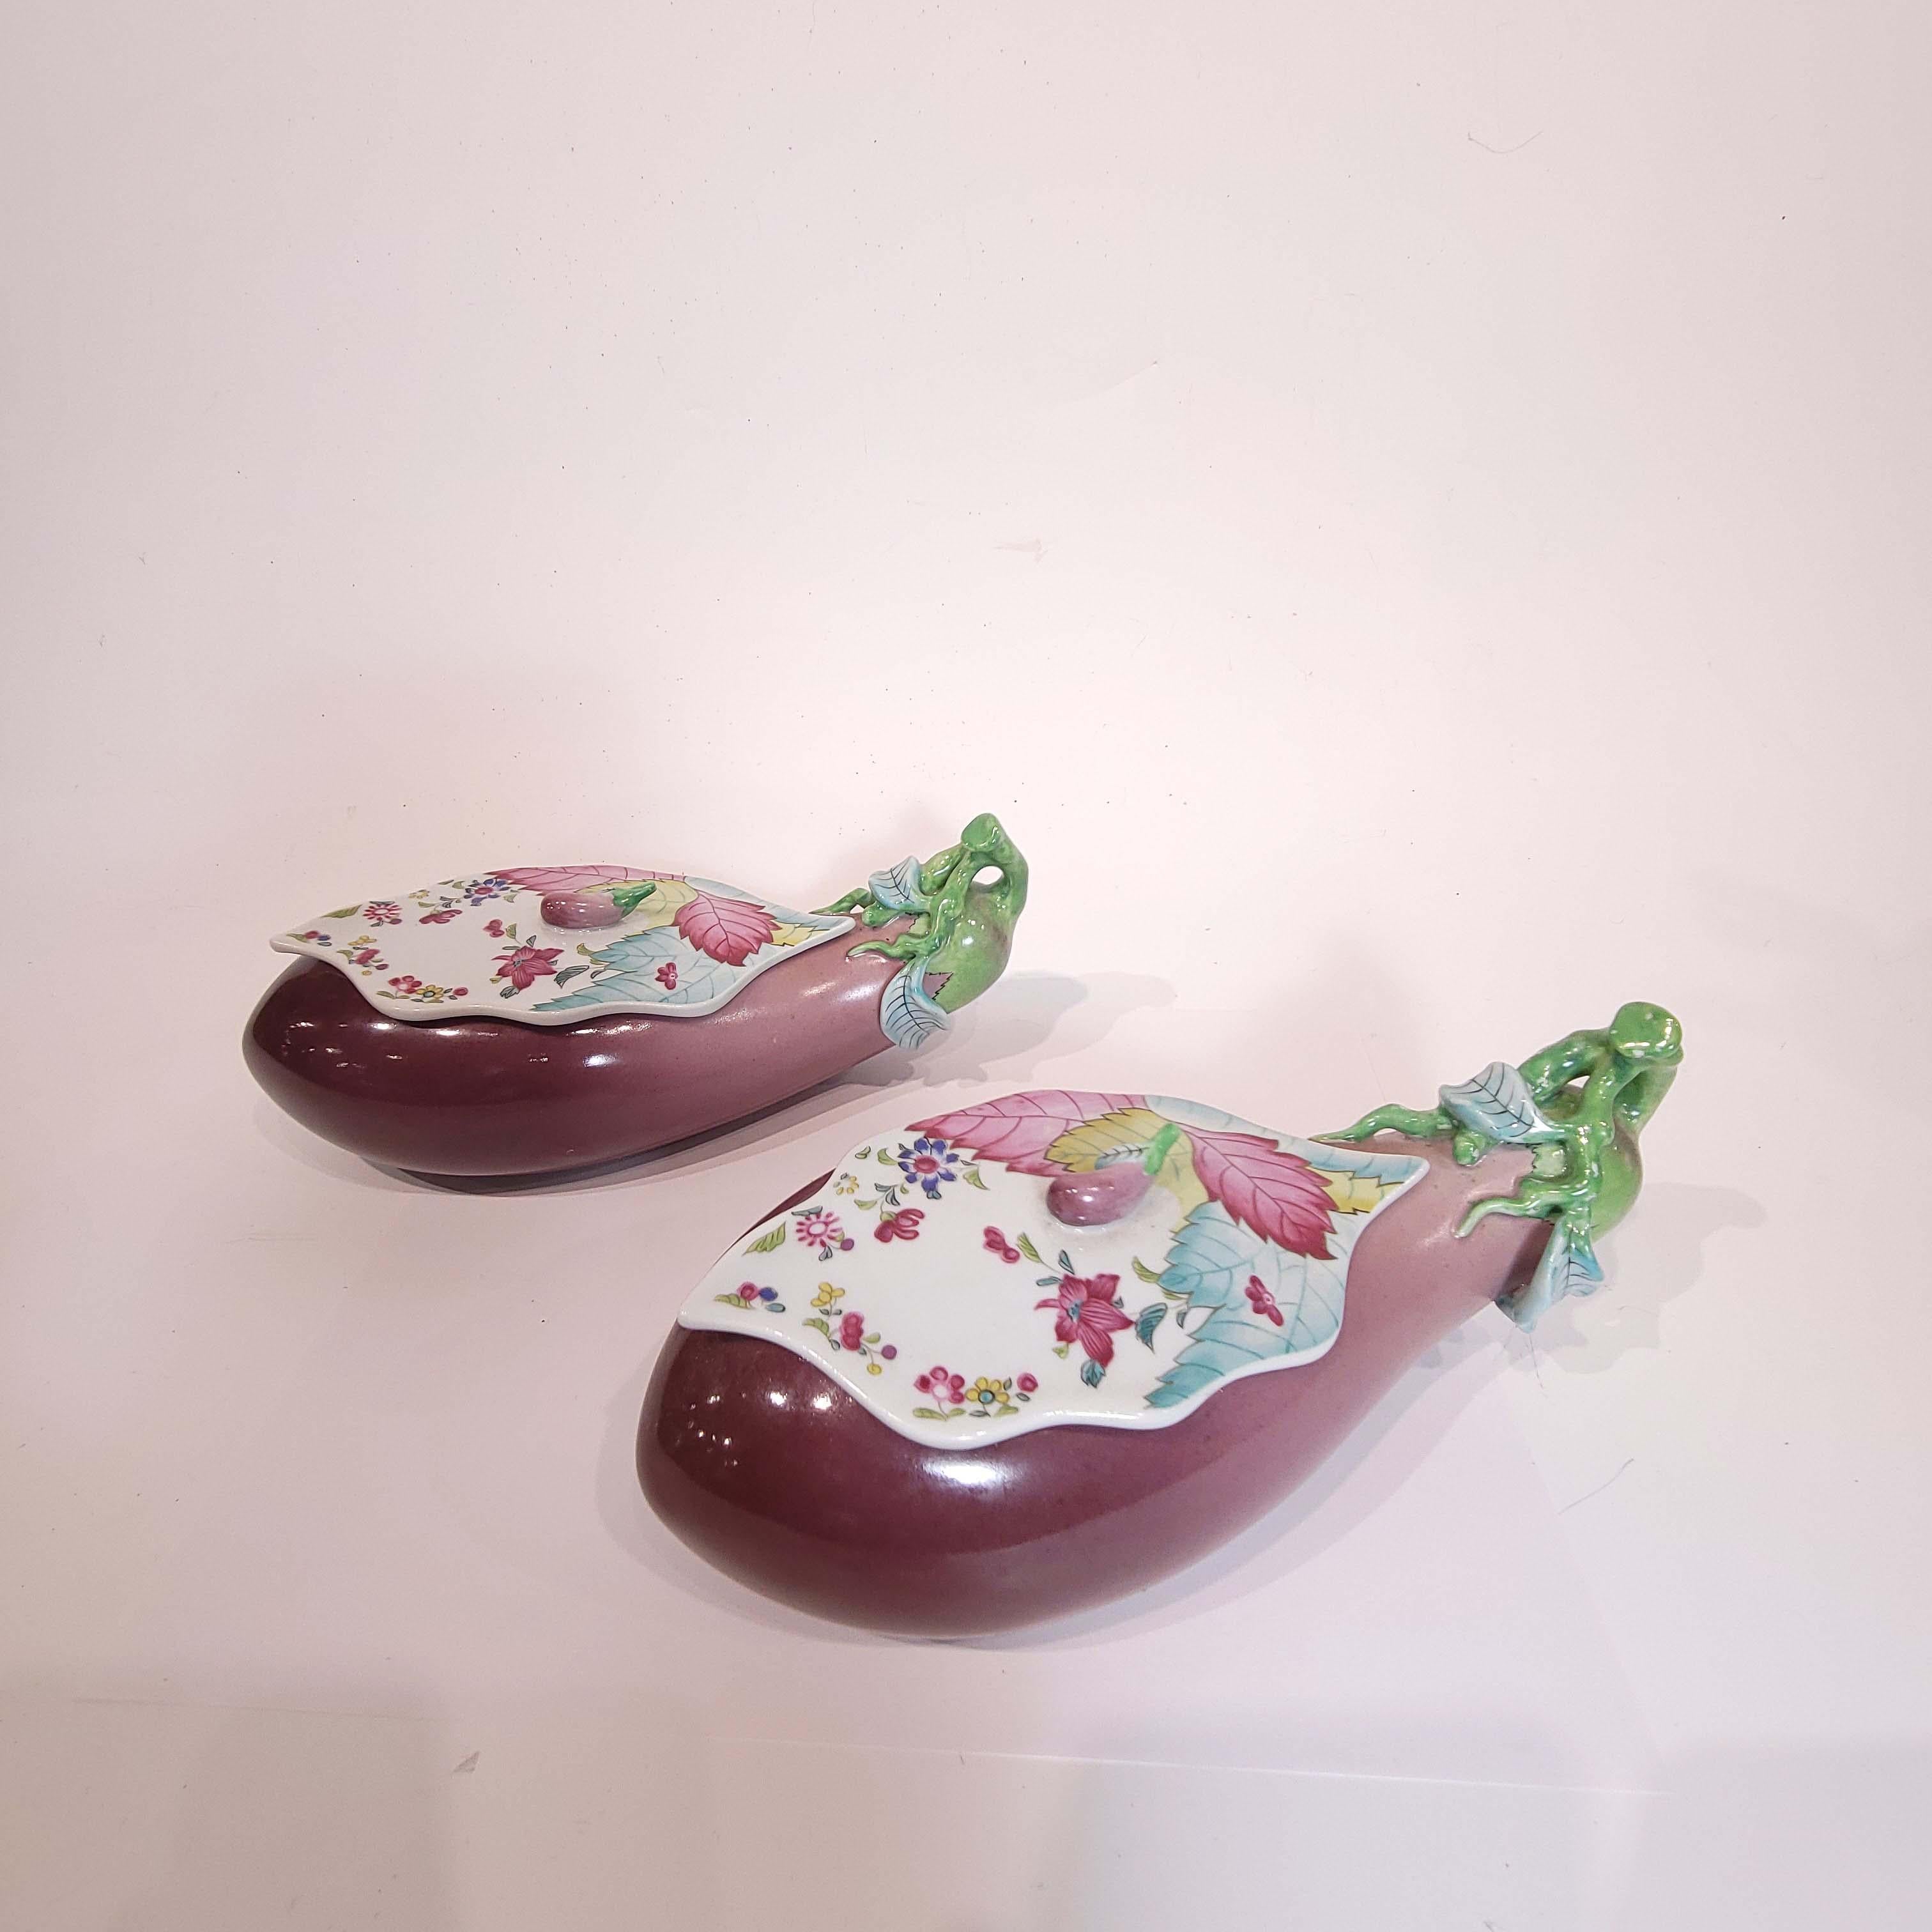 Chinese Export Pair of Mottahedeh Nelson Rockefeller Collection Tobacco Leaf Covered Eggplants